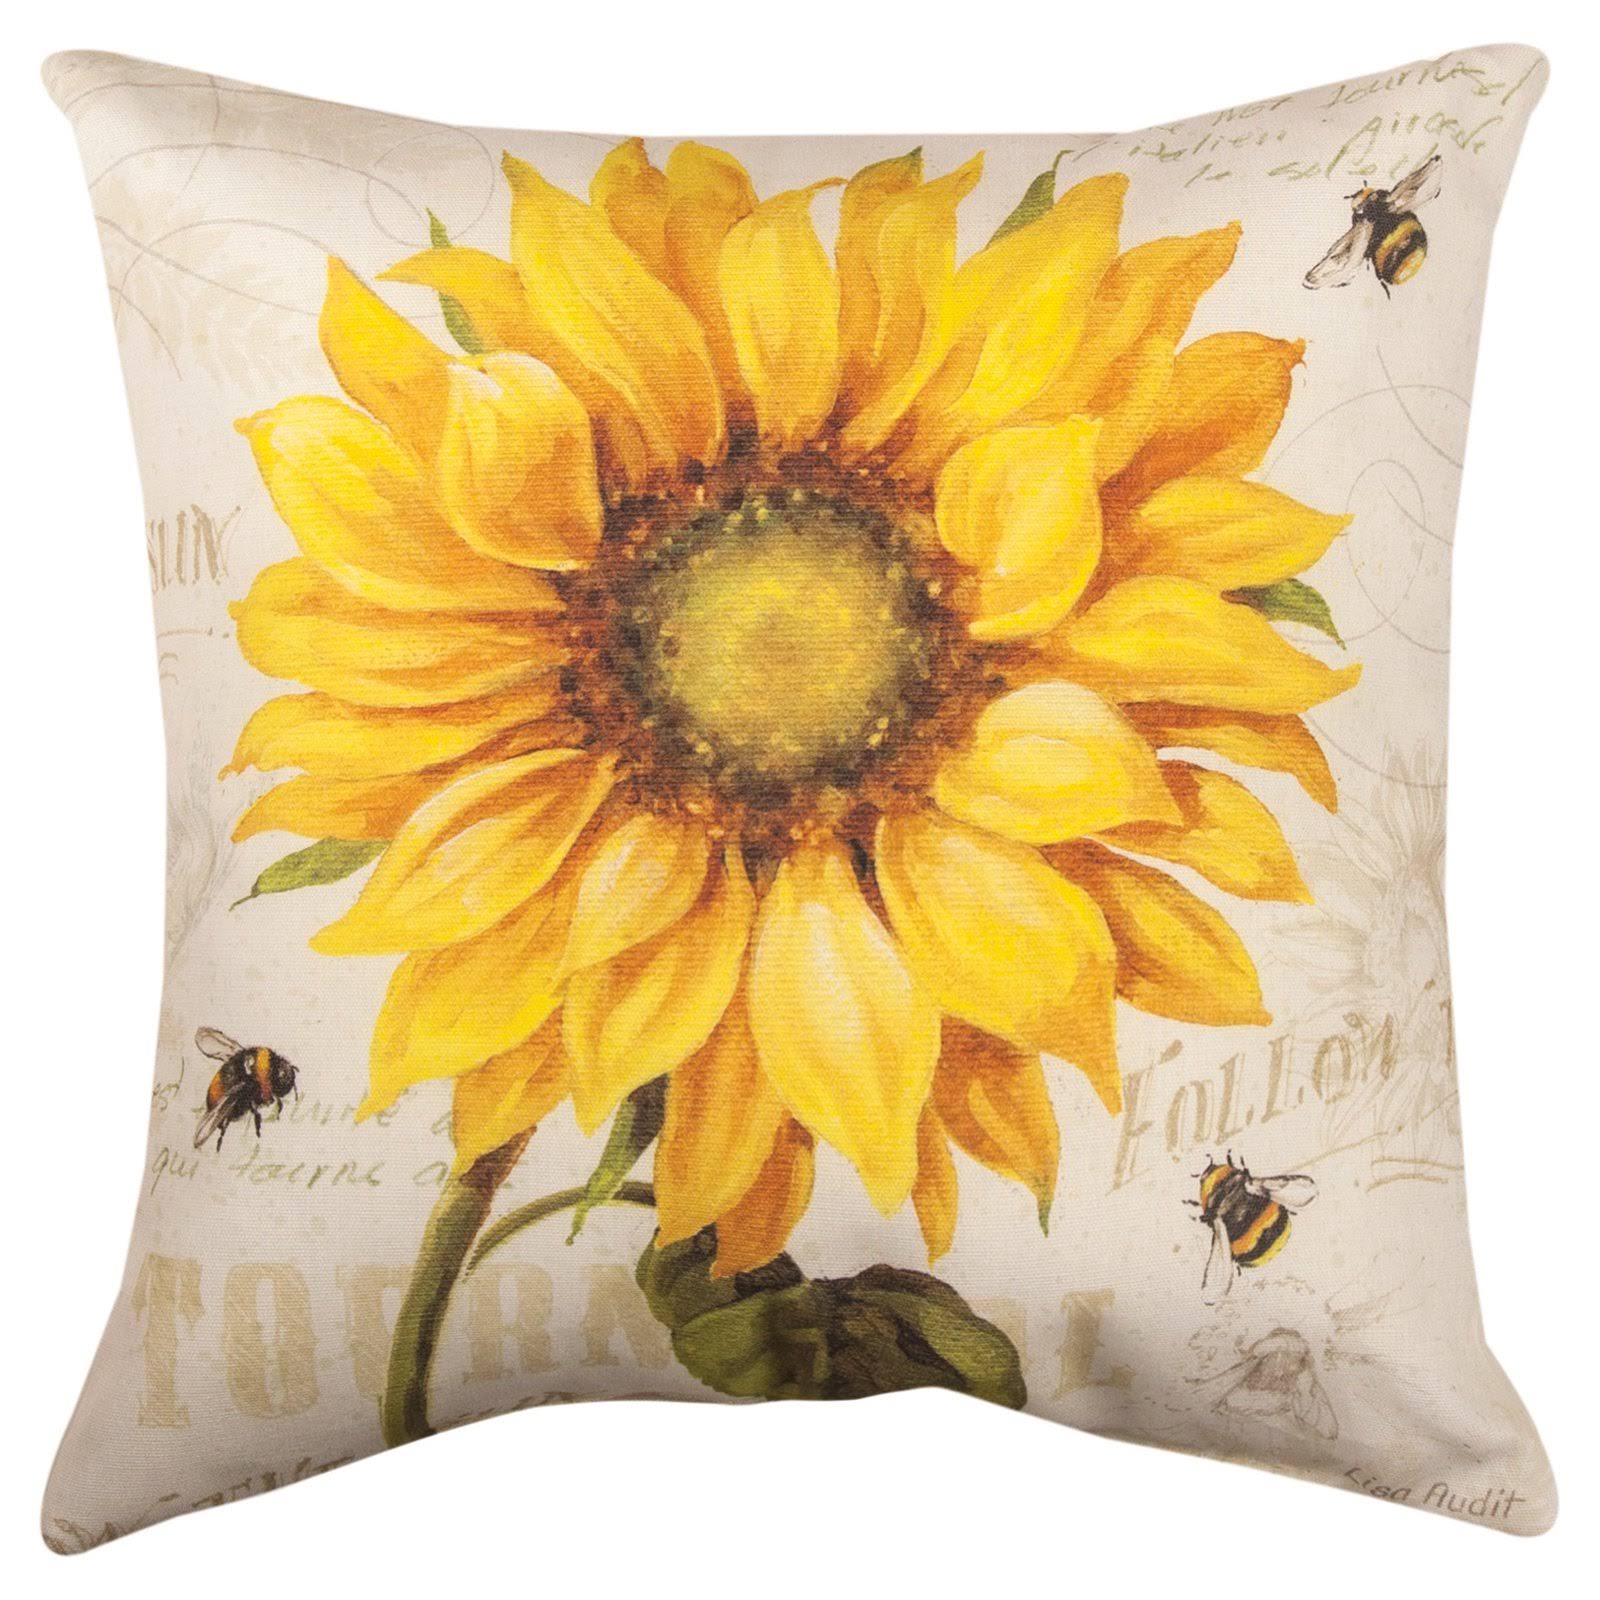 Weavers Manual Woodworkers Under the Sun Multicolored Throw Pillow, Size 18 X 18